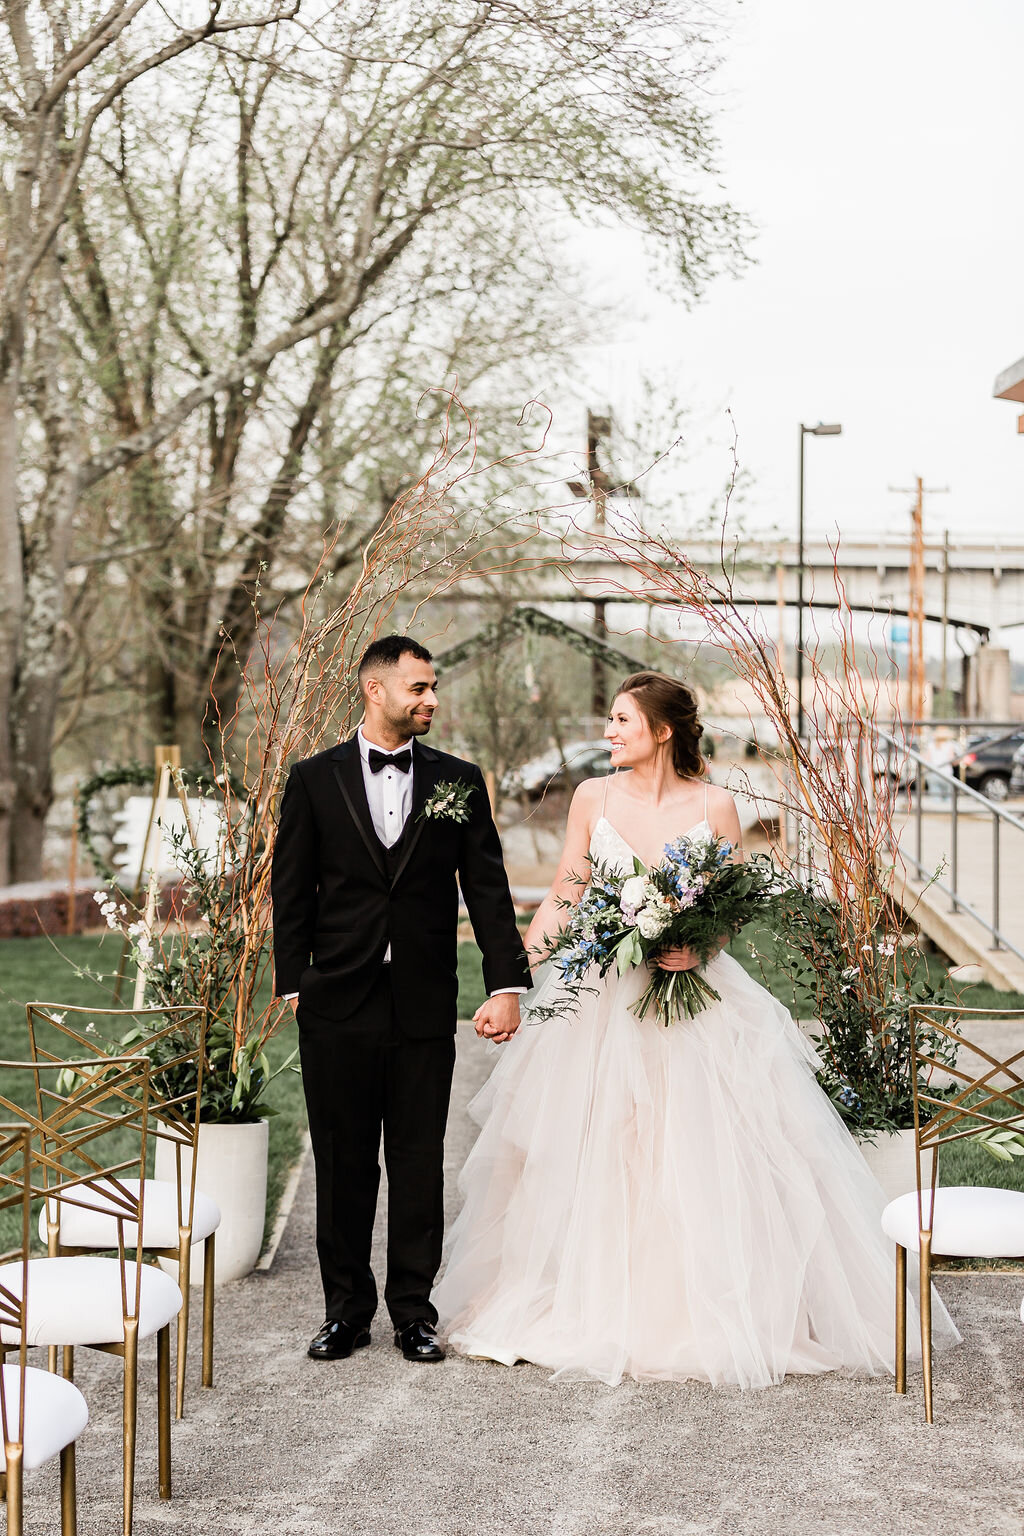 Tree Pittsburgh, a new sustainably designed wedding venue serves as the backdrop for this Pennsylvania Wedding bridal inspiration shoot. Featuring floral filled flatlays and luxe details Photographed by Pittsburgh area Wedding photographer, Megan Mc…